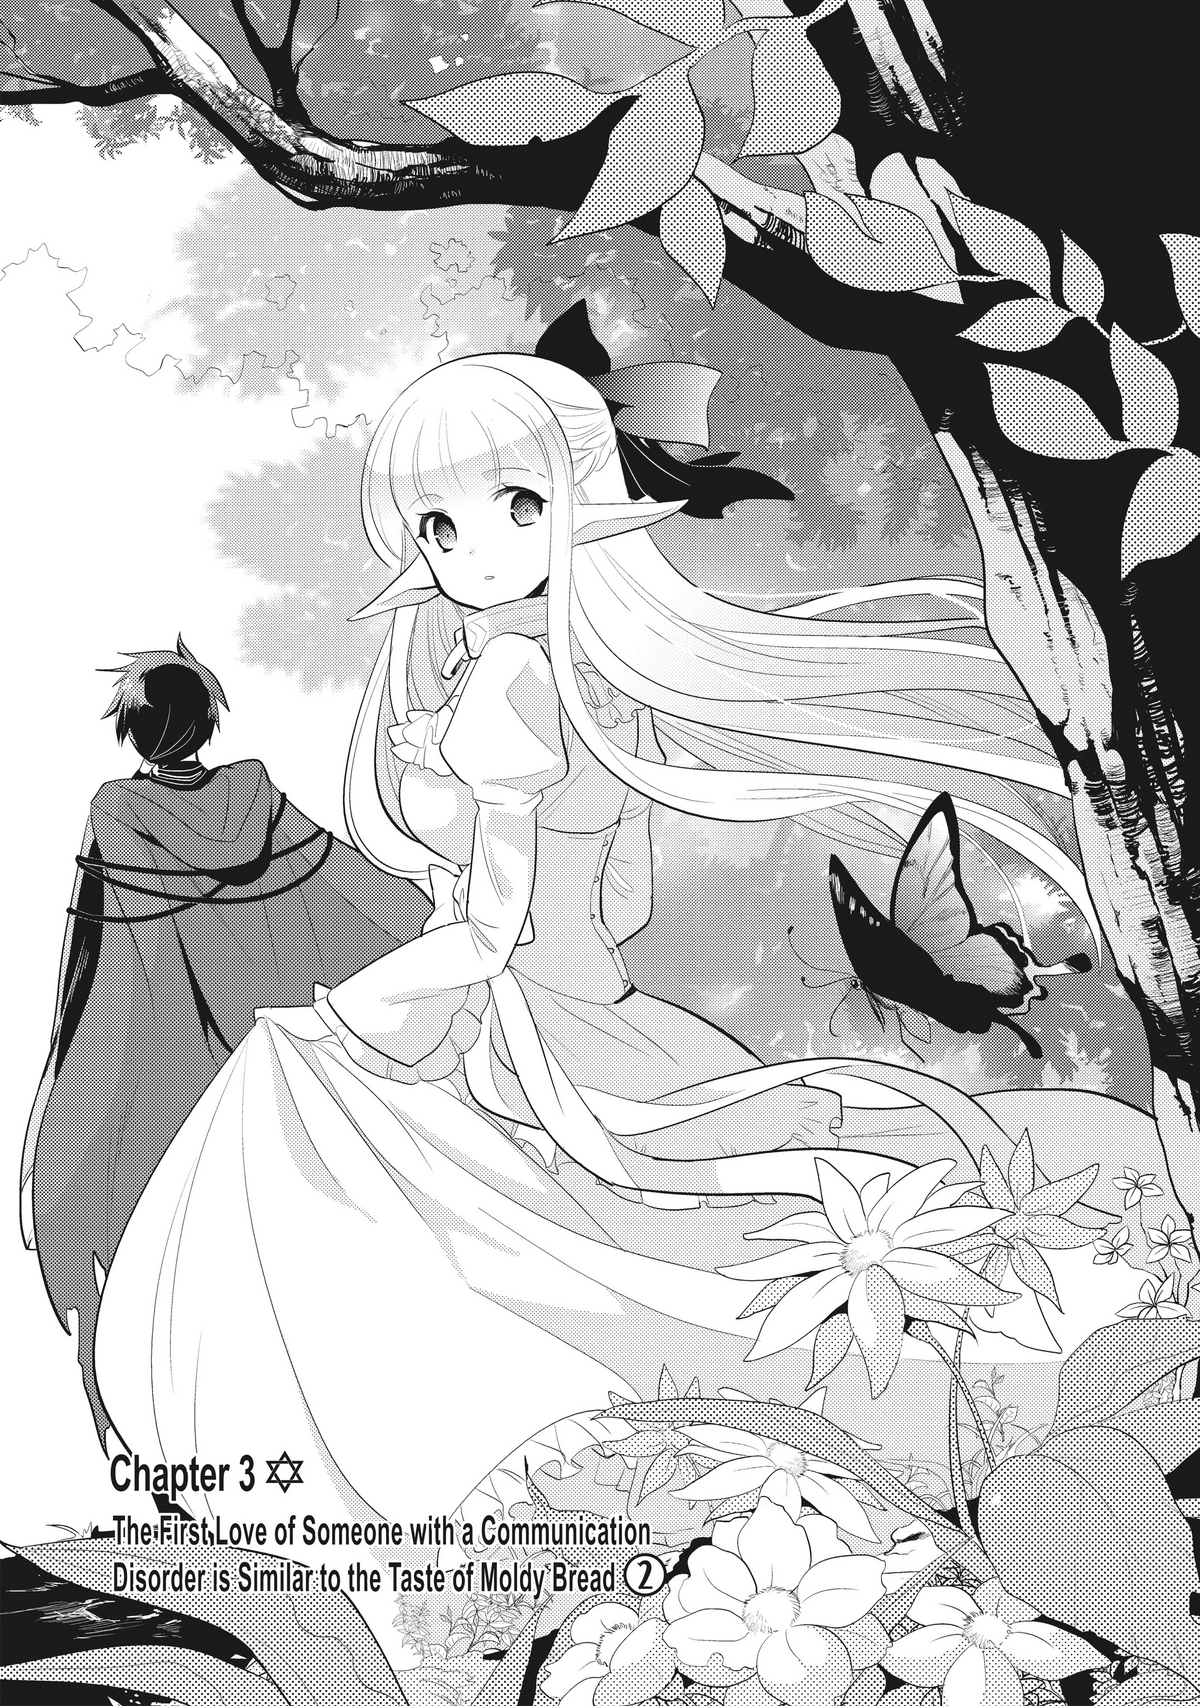 Manga / Chapter 3 | An Archdemon's Dilemma: How to Love Your Elf Bride ...